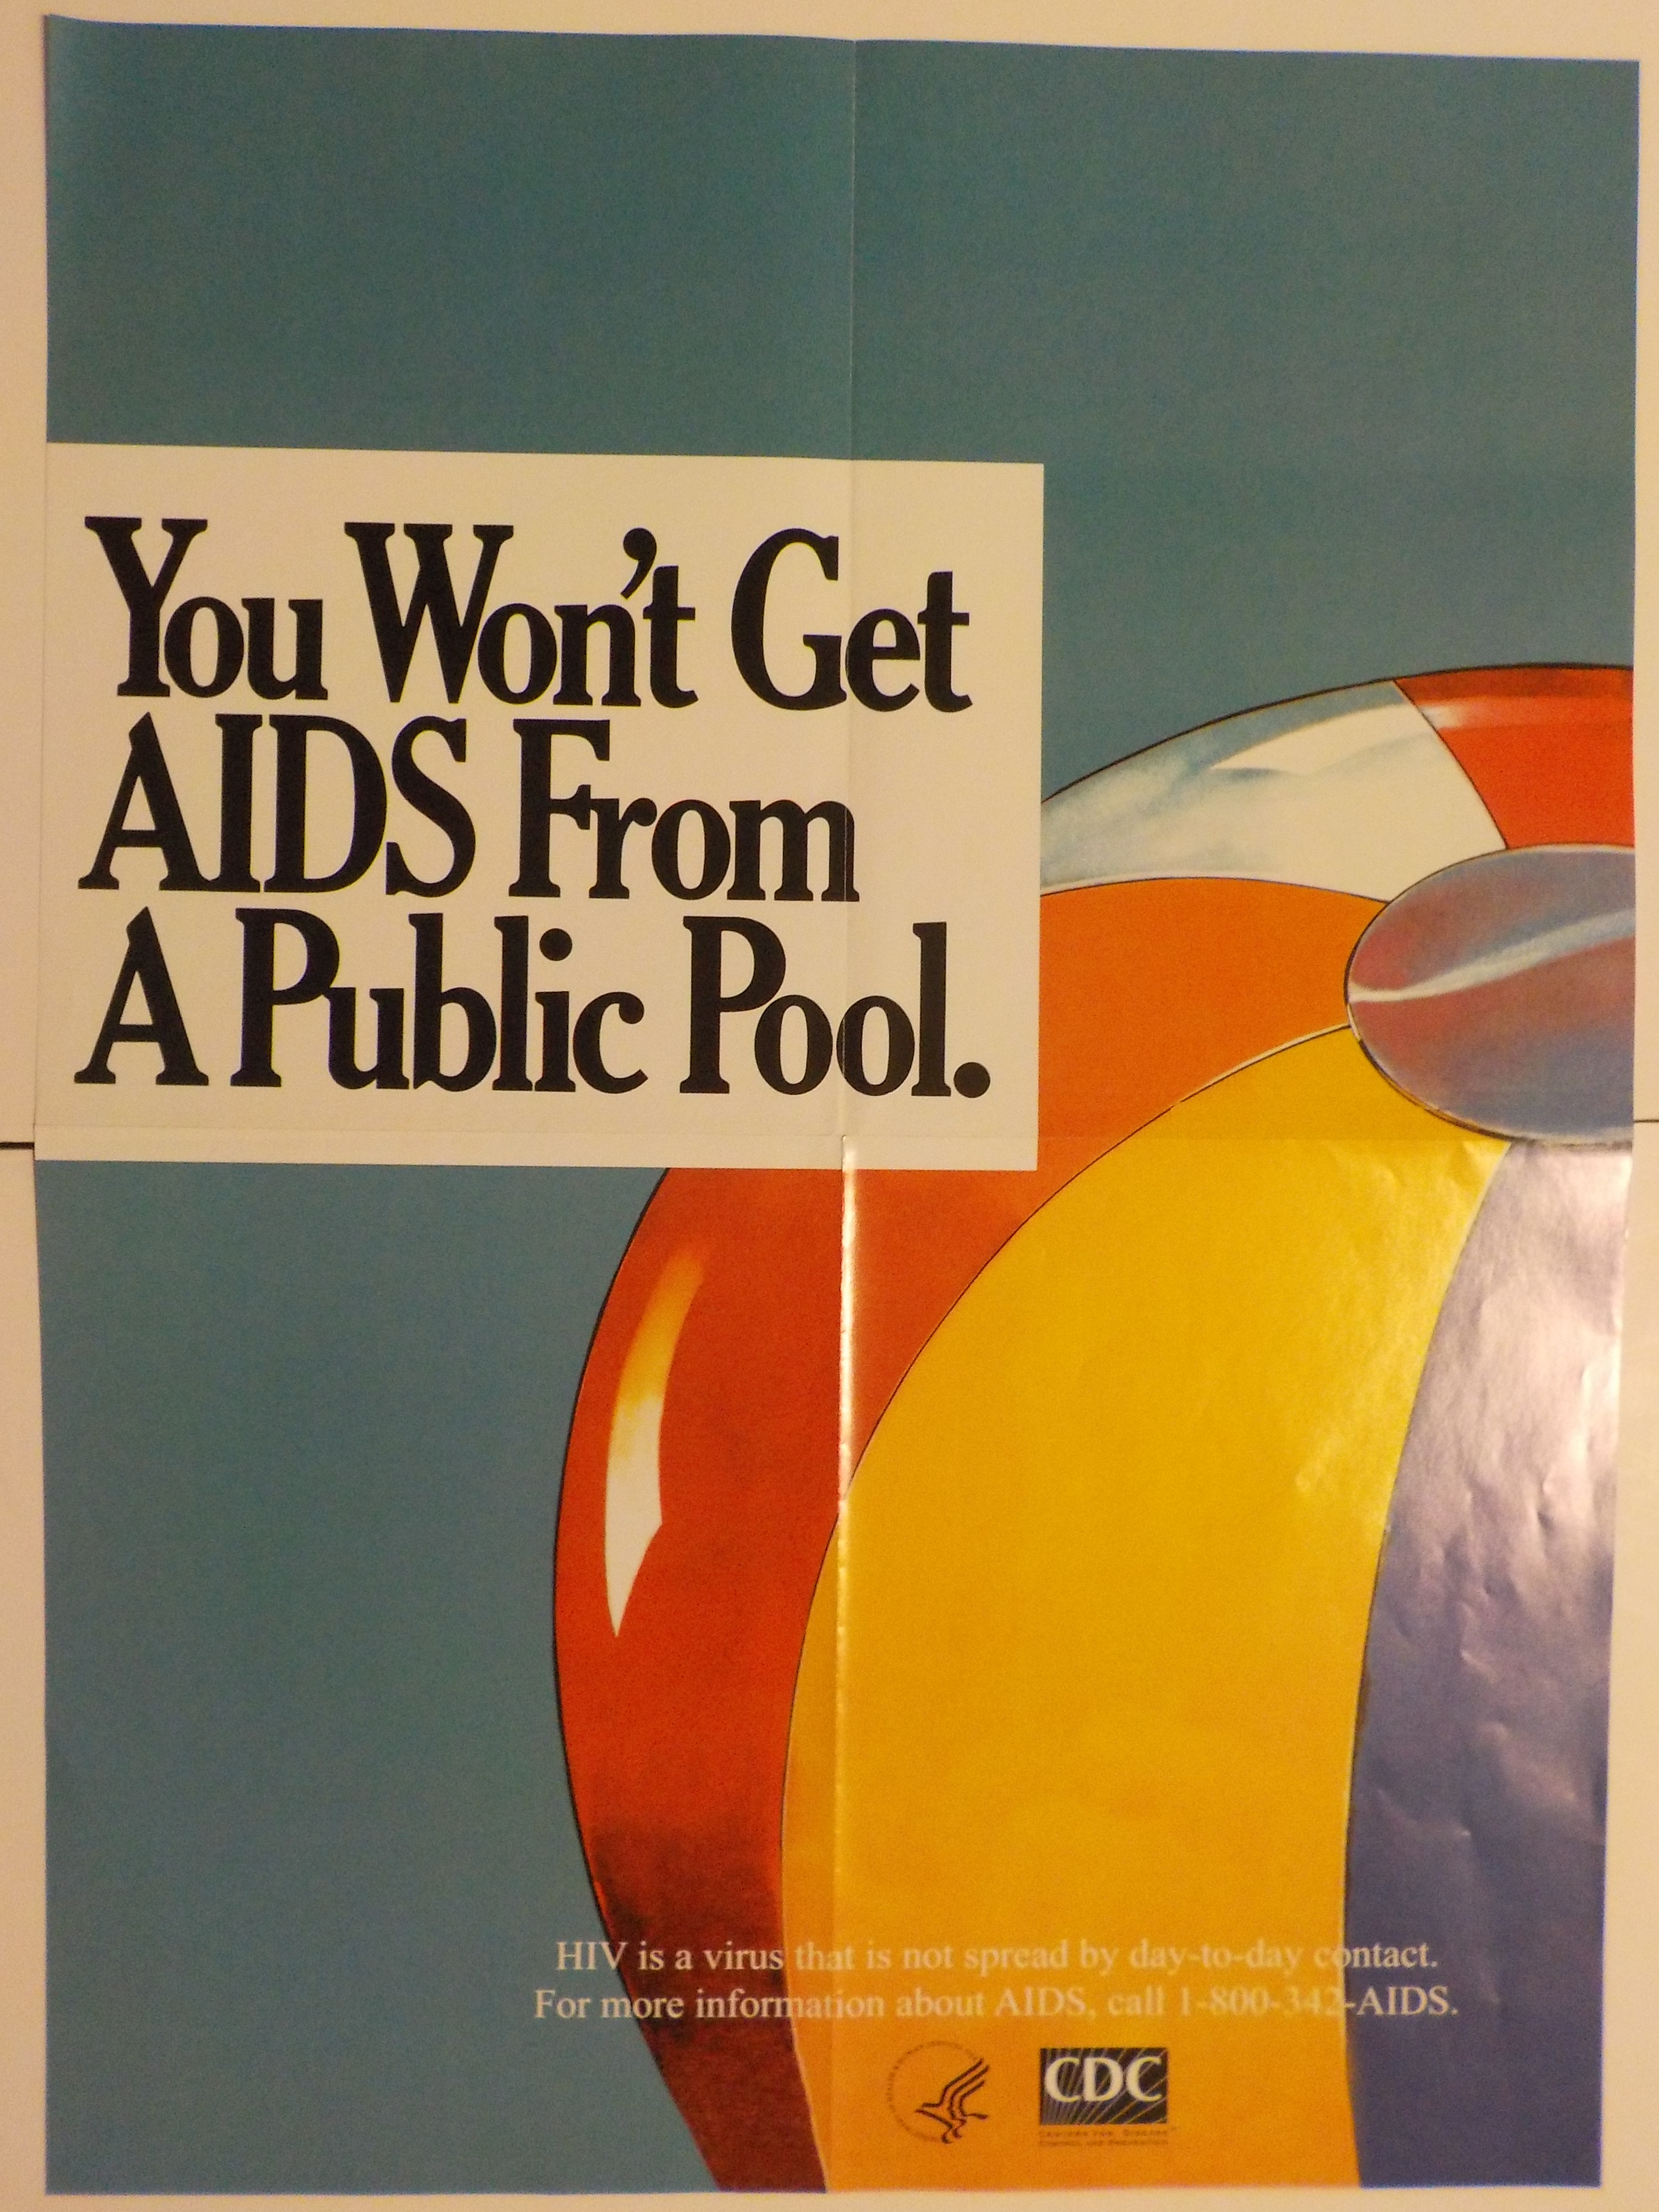 You won't get AIDS from a public pool